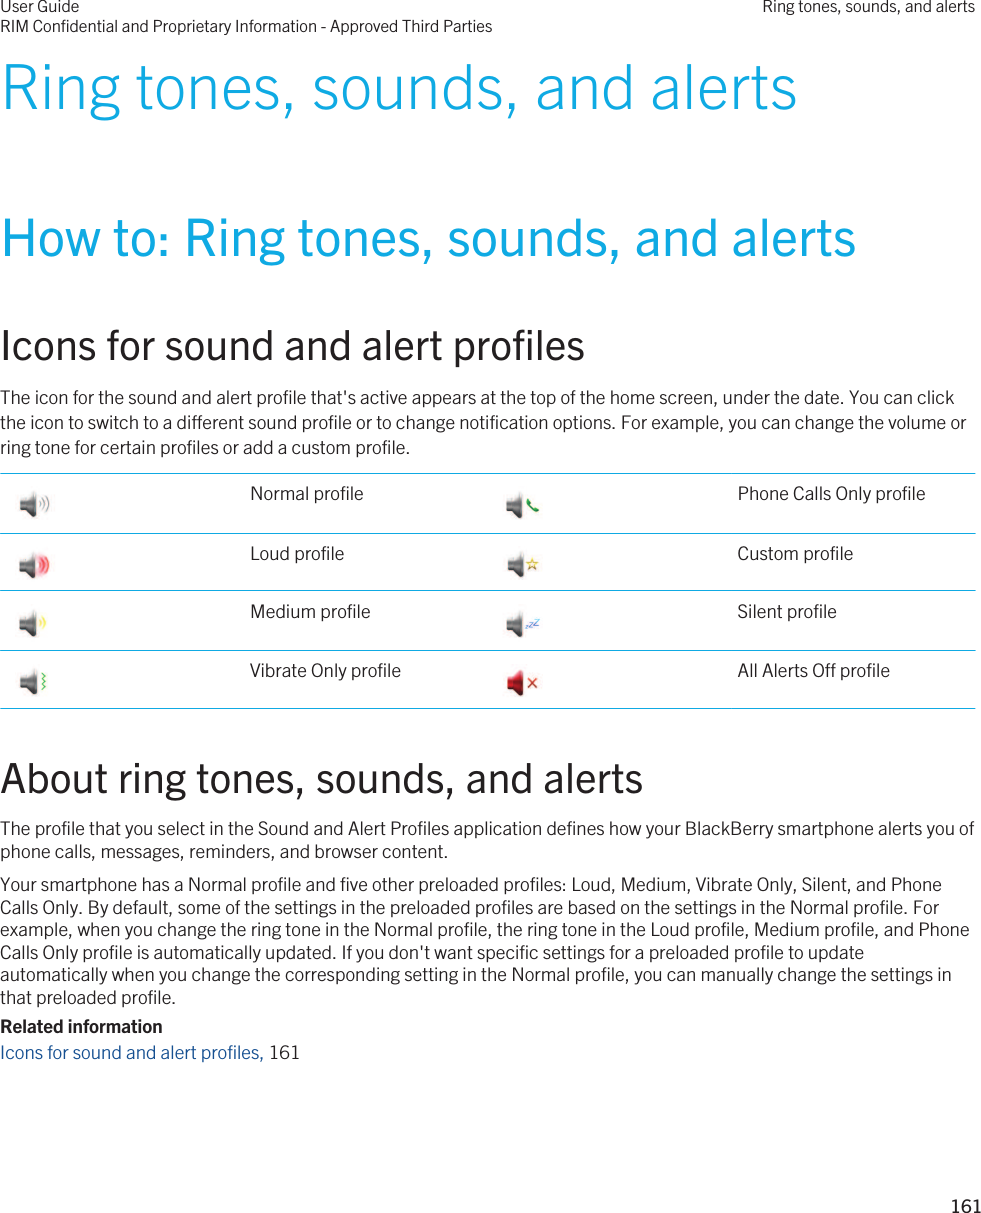 Ring tones, sounds, and alertsHow to: Ring tones, sounds, and alertsIcons for sound and alert profilesThe icon for the sound and alert profile that&apos;s active appears at the top of the home screen, under the date. You can click the icon to switch to a different sound profile or to change notification options. For example, you can change the volume or ring tone for certain profiles or add a custom profile. Normal profile  Phone Calls Only profile Loud profile  Custom profile Medium profile  Silent profile Vibrate Only profile  All Alerts Off profileAbout ring tones, sounds, and alertsThe profile that you select in the Sound and Alert Profiles application defines how your BlackBerry smartphone alerts you of phone calls, messages, reminders, and browser content.Your smartphone has a Normal profile and five other preloaded profiles: Loud, Medium, Vibrate Only, Silent, and Phone Calls Only. By default, some of the settings in the preloaded profiles are based on the settings in the Normal profile. For example, when you change the ring tone in the Normal profile, the ring tone in the Loud profile, Medium profile, and Phone Calls Only profile is automatically updated. If you don&apos;t want specific settings for a preloaded profile to update automatically when you change the corresponding setting in the Normal profile, you can manually change the settings in that preloaded profile.Related informationIcons for sound and alert profiles, 161 User GuideRIM Confidential and Proprietary Information - Approved Third PartiesRing tones, sounds, and alerts161 